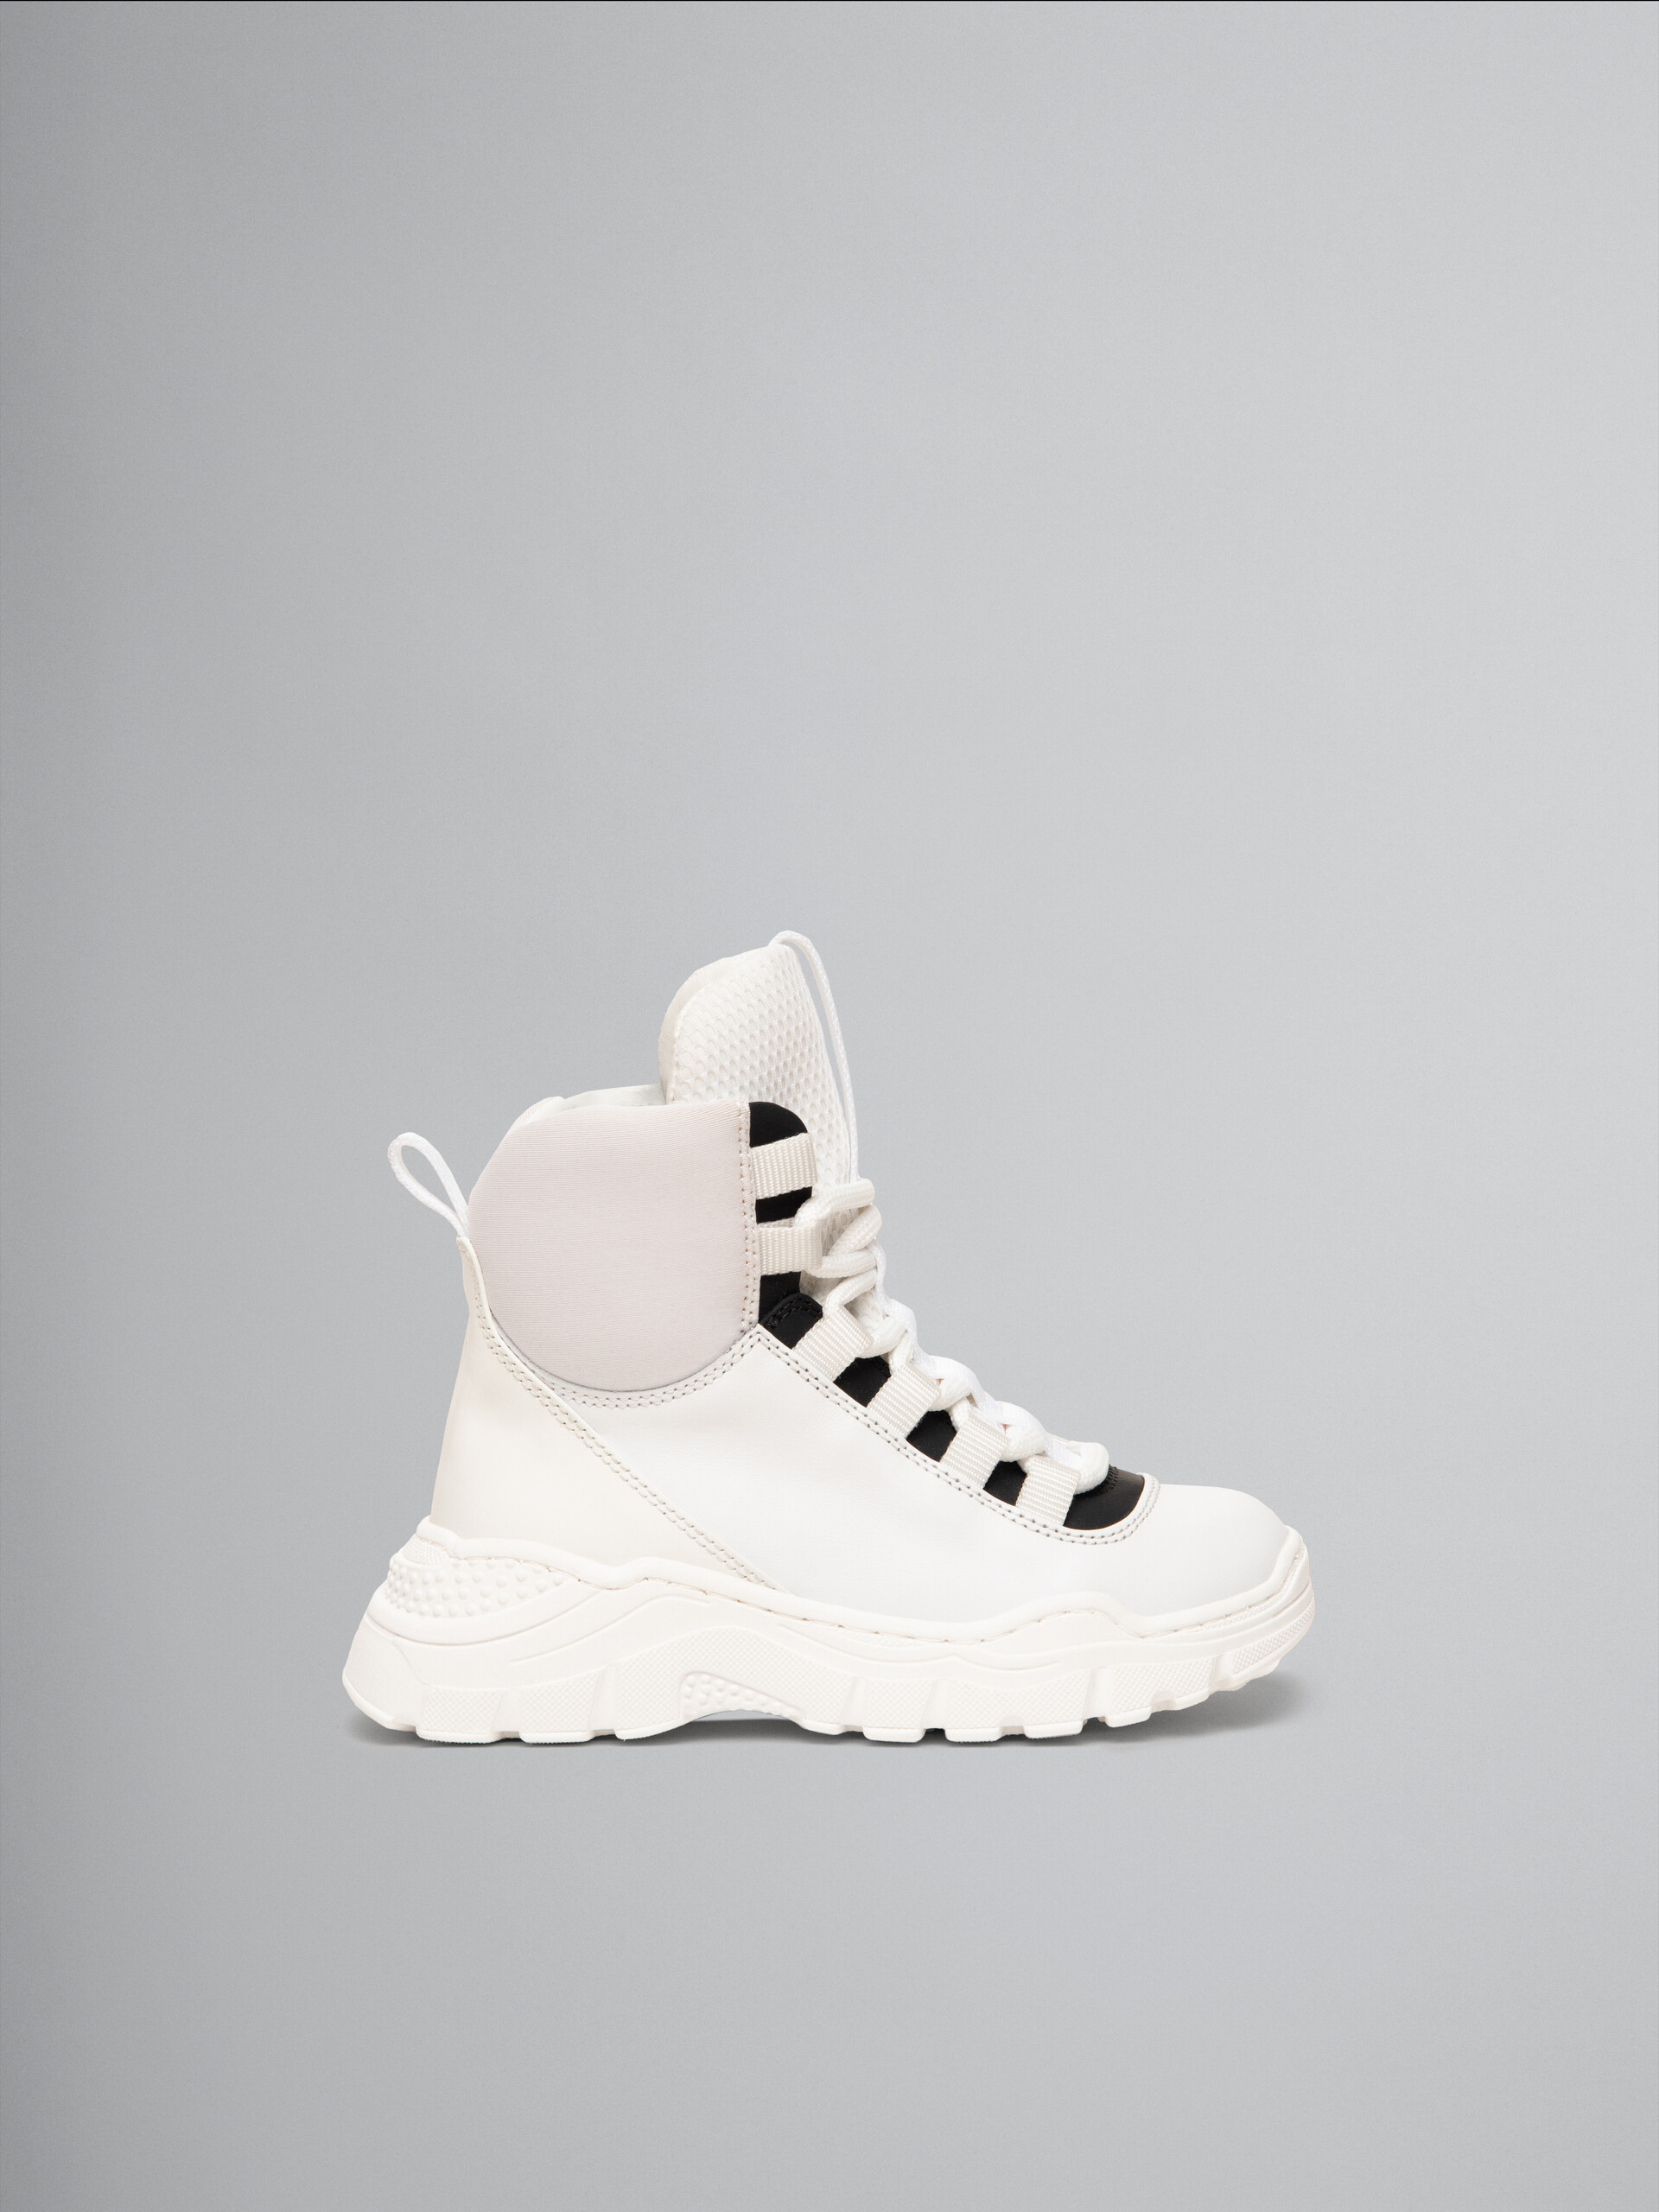 White leather zip ankle boot - Other accessories - Image 1